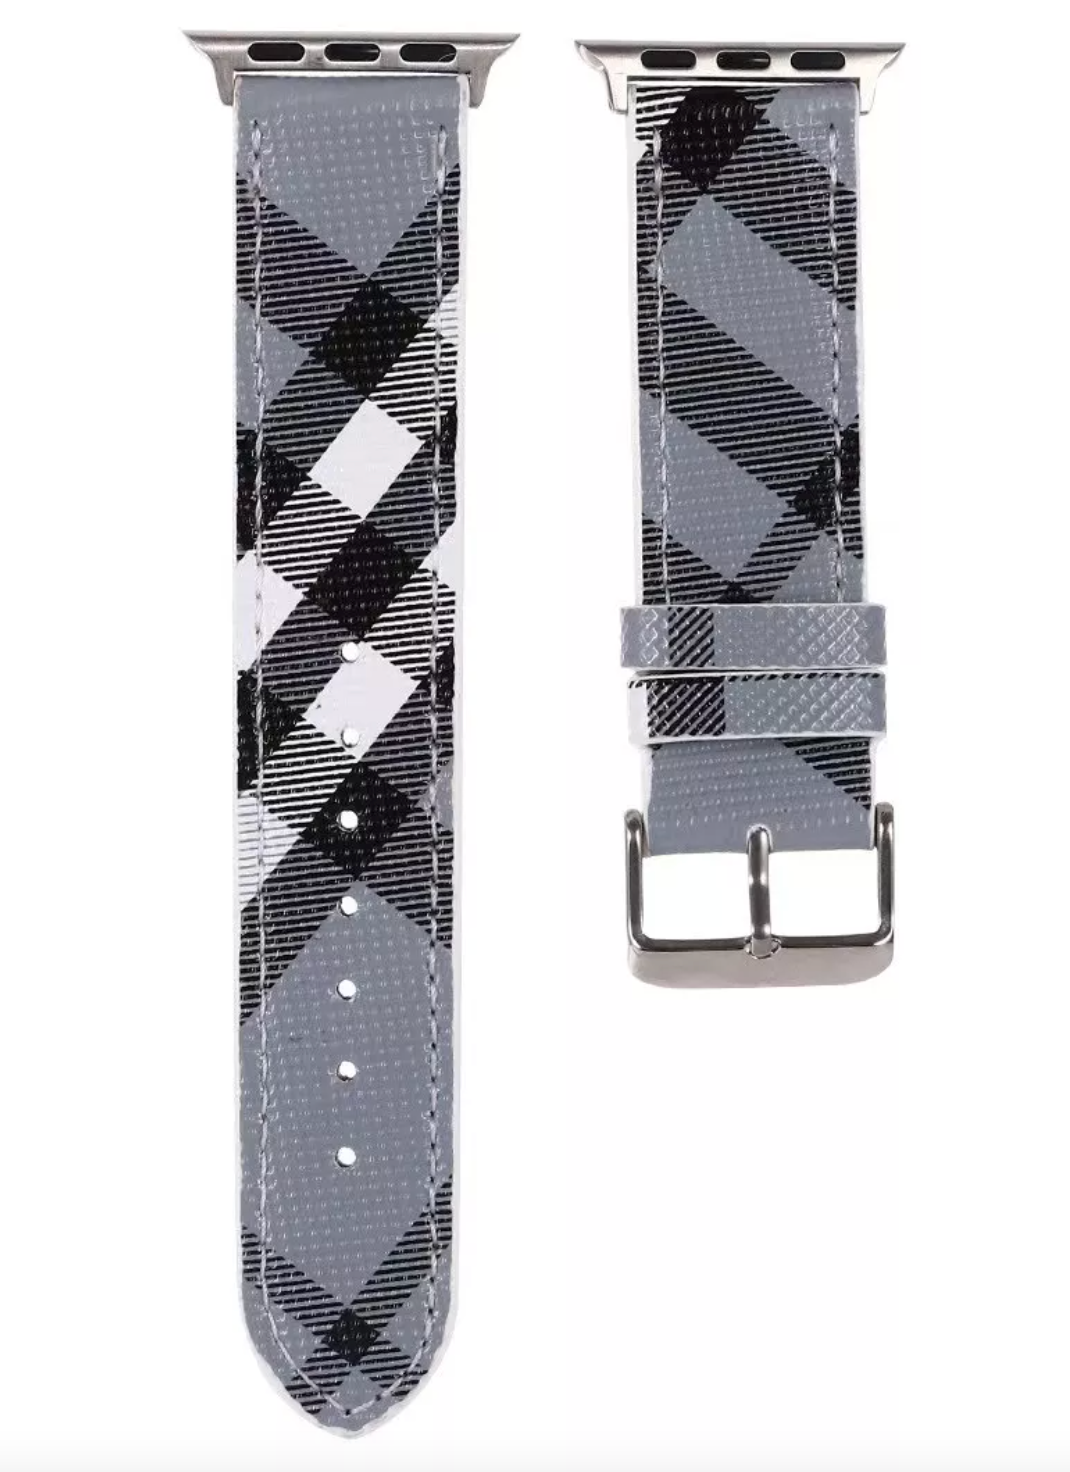 Burberry Watch Band – ANDRA'S